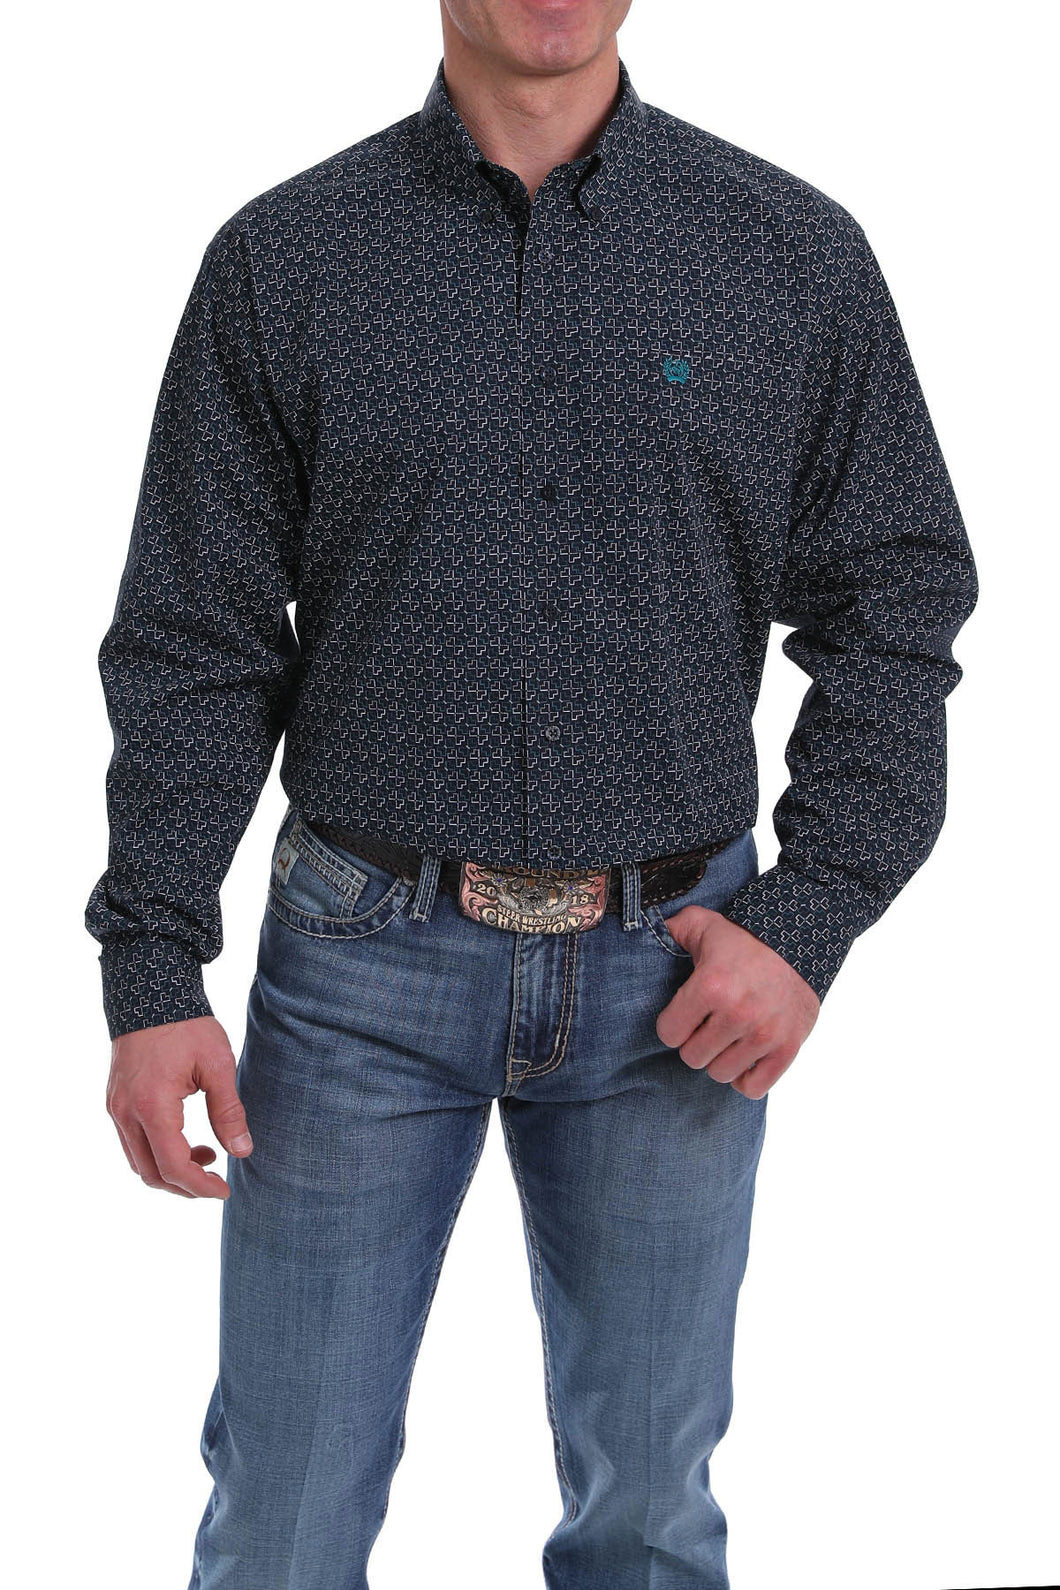 MEN'S NAVY, TEAL AND WHITE GEOMETRIC PRINT BUTTON-DOWN WESTERN SHIRT